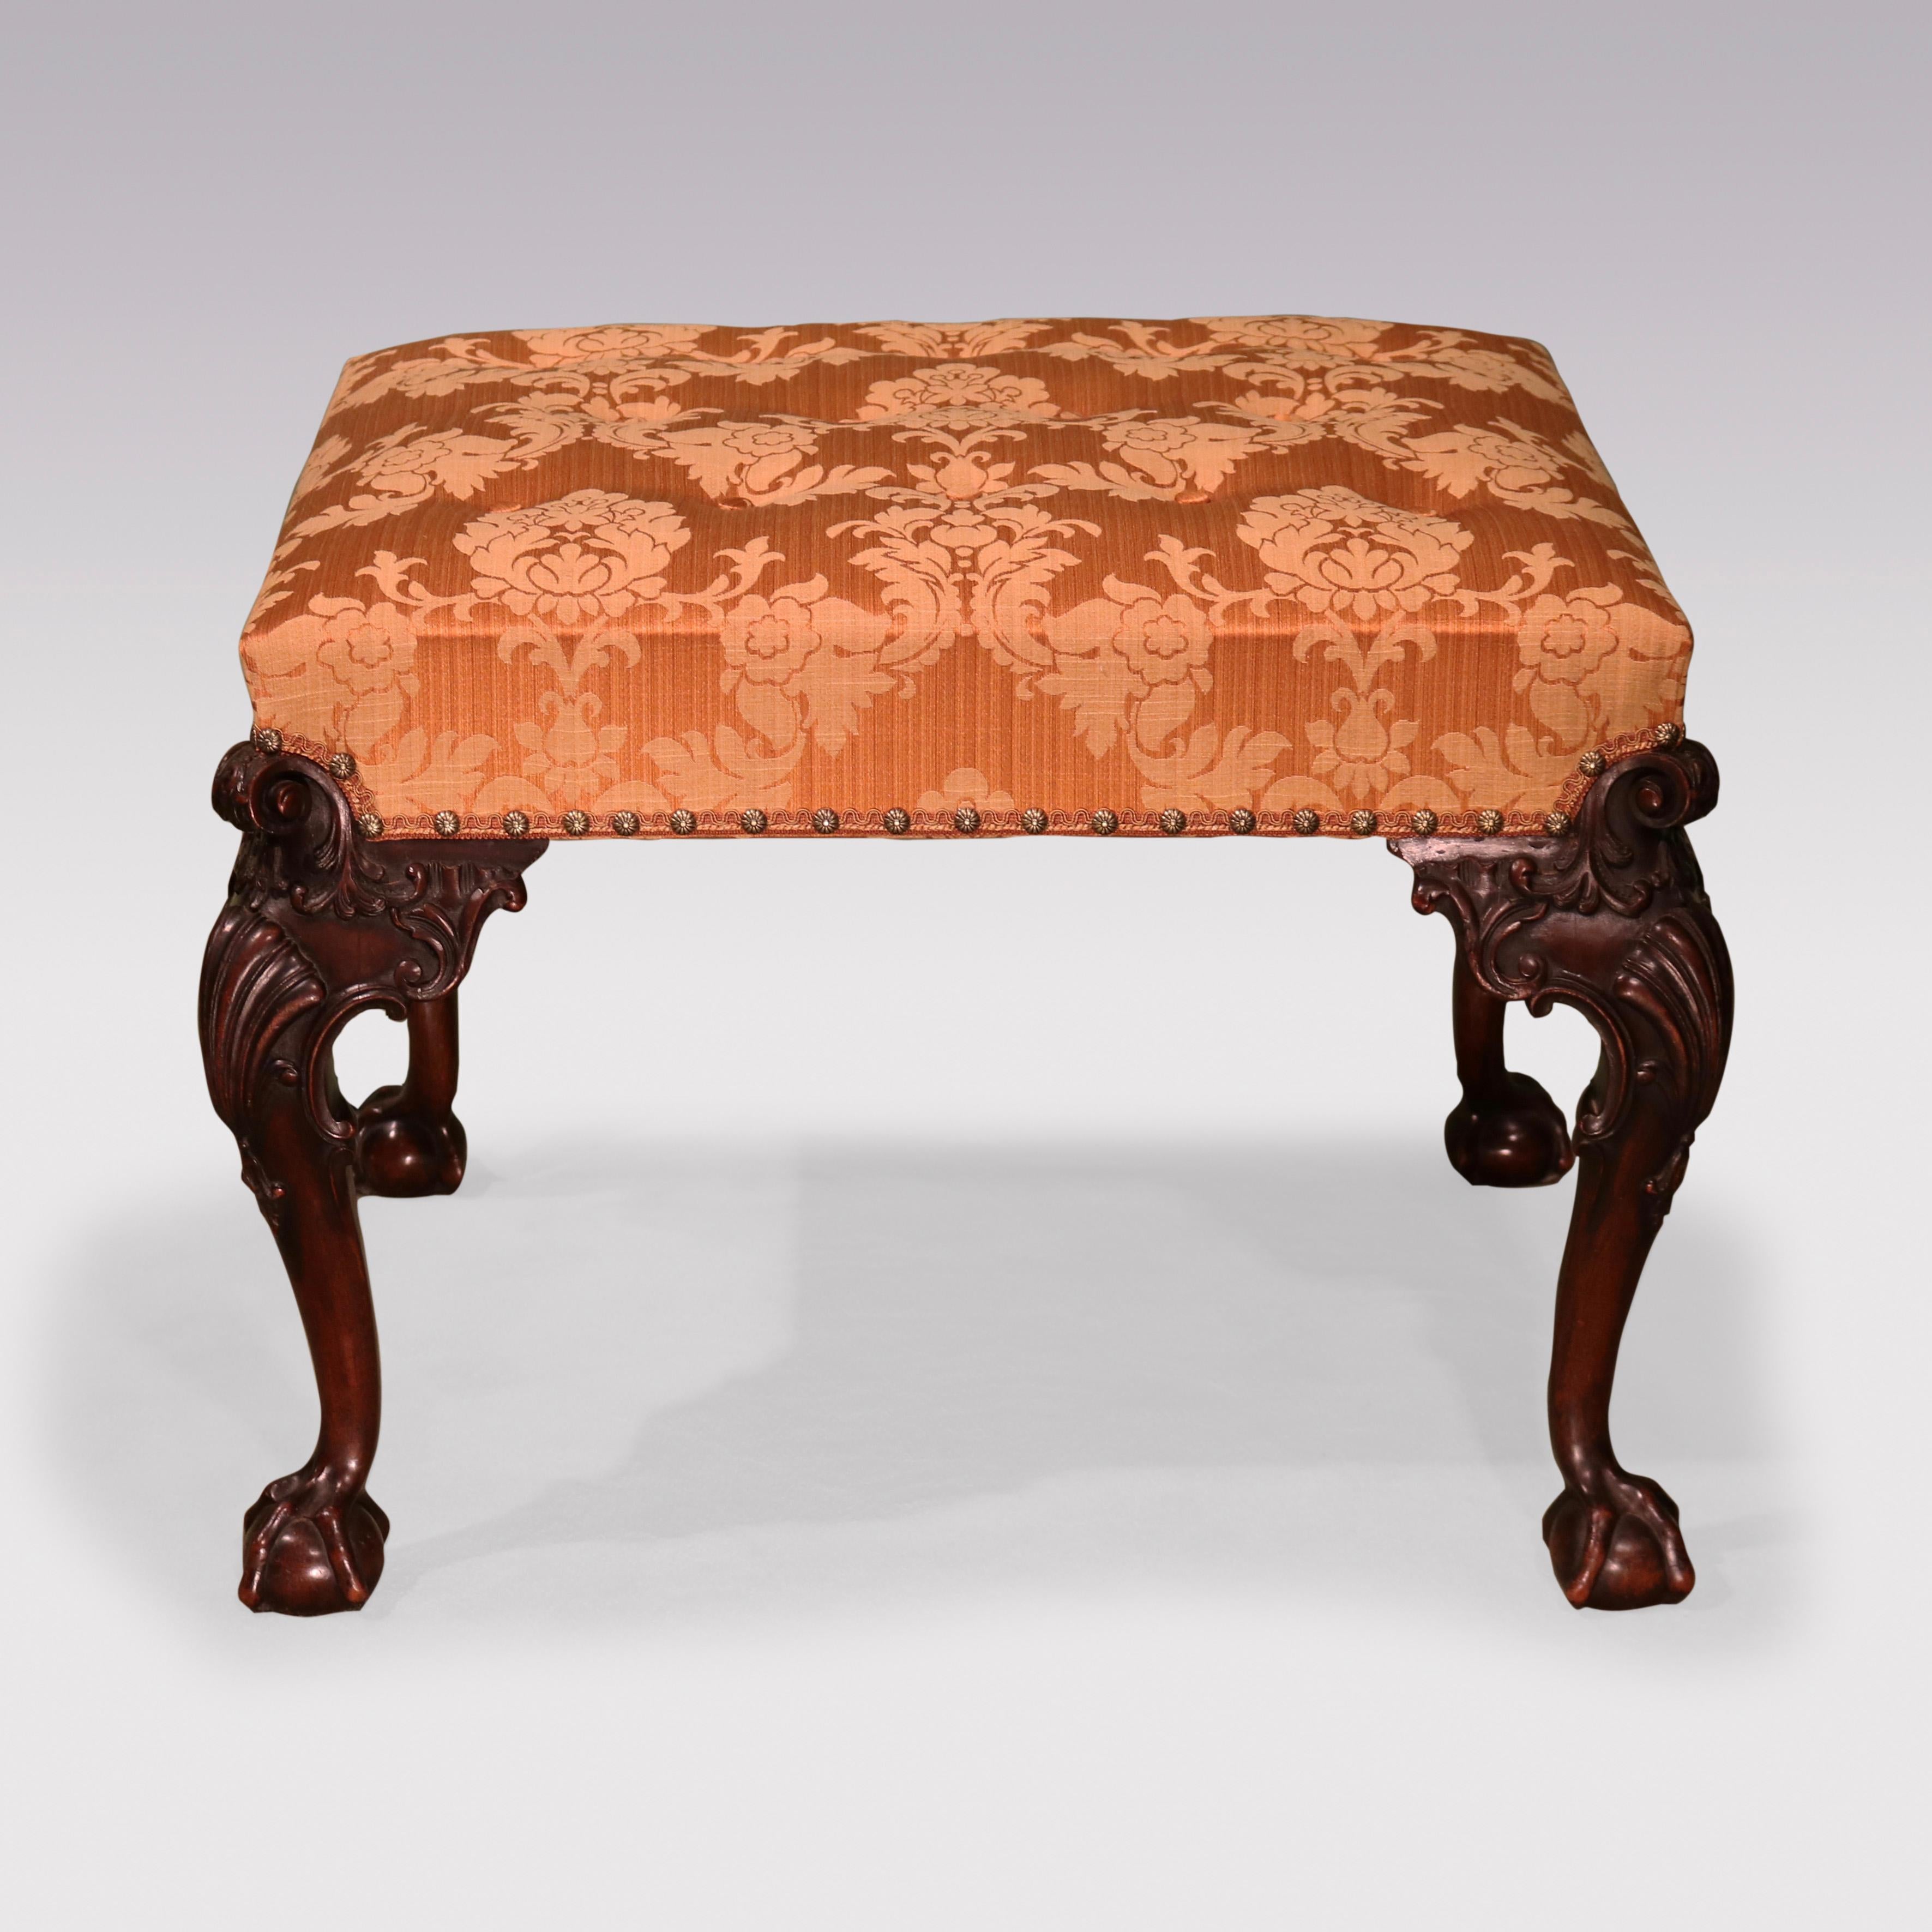 A mid-19th Century Chippendale Revival mahogany Stool, having upholstered & buttoned rectangular top supported on acanthus & scroll cabriole legs with shell carving to the knees, supported on claw & ball feet.